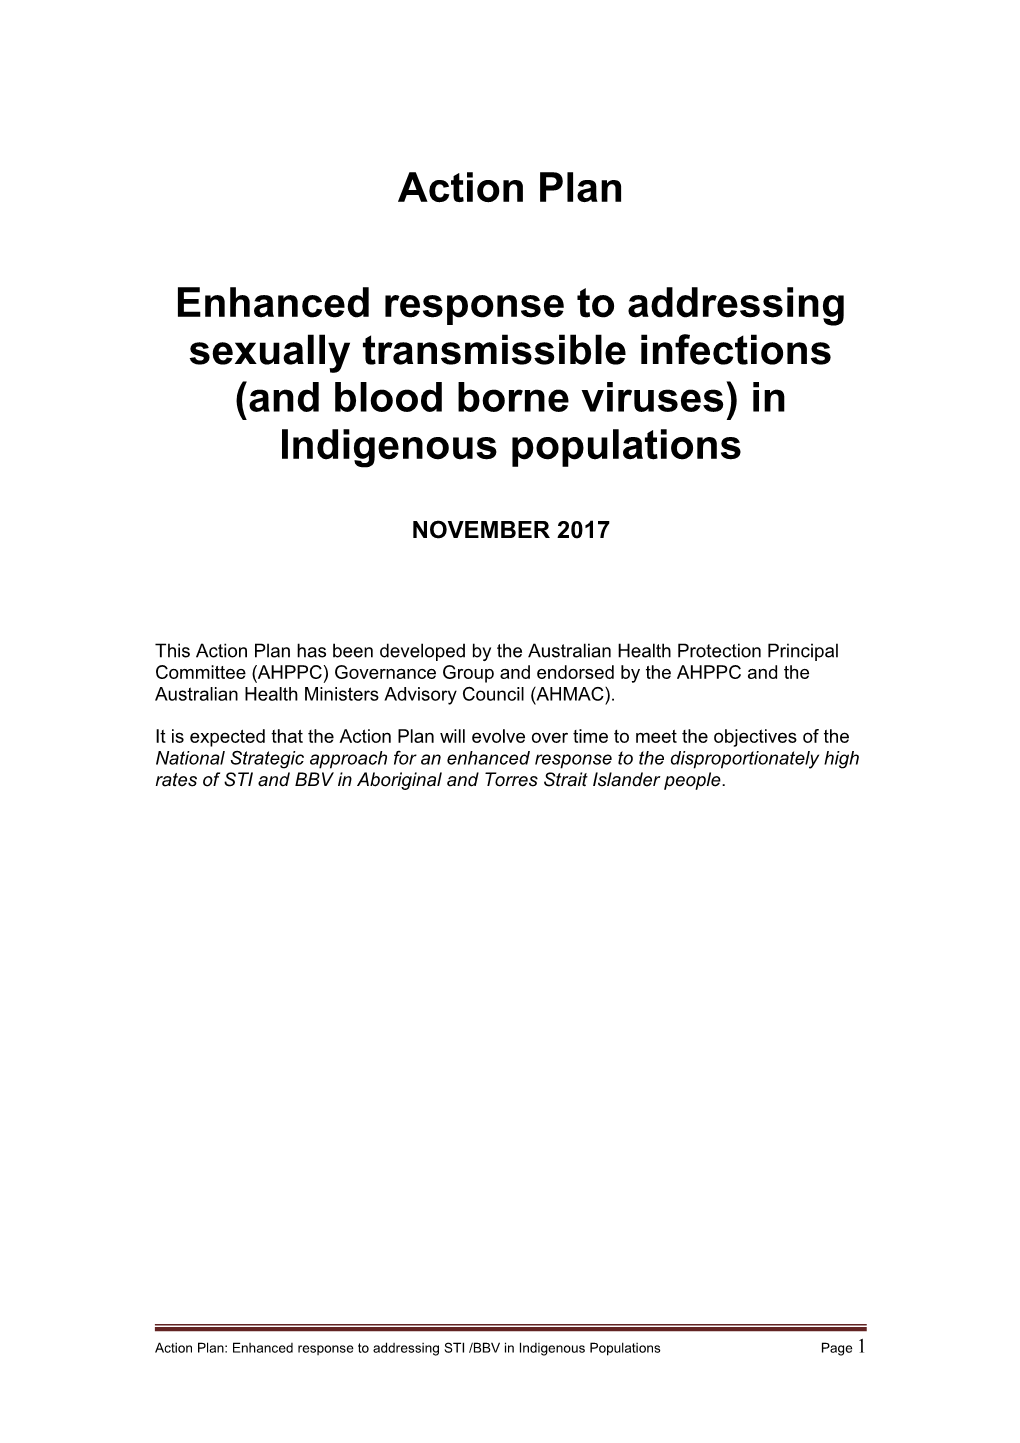 Enhanced Response to Addressing Sexually Transmissibleinfections (And Blood Borne Viruses)